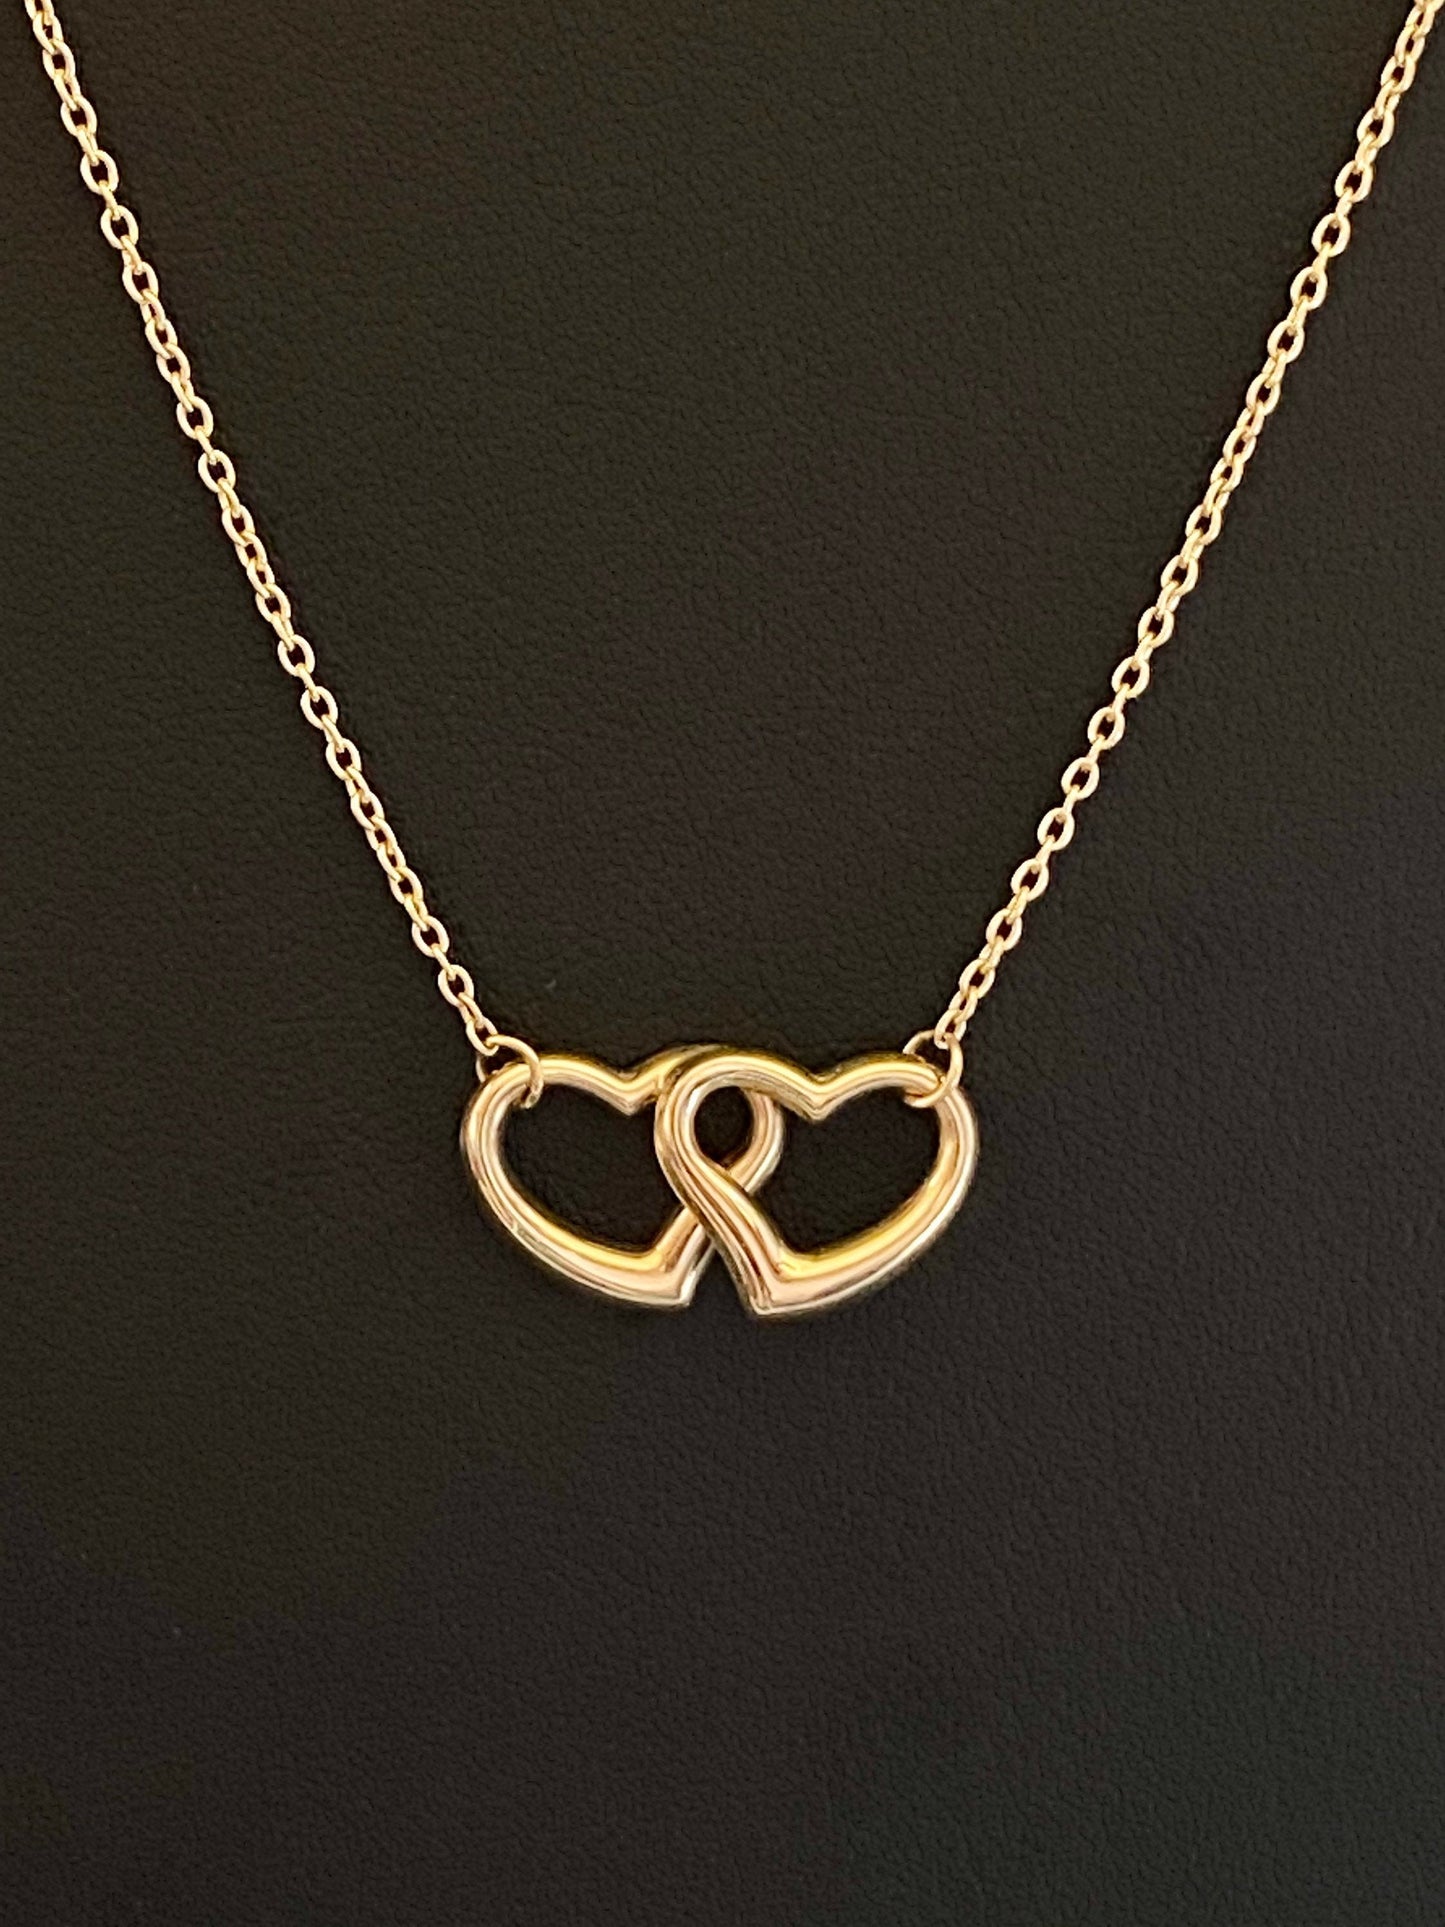 Yellow Gold Double Heart Pendant Chain Necklace